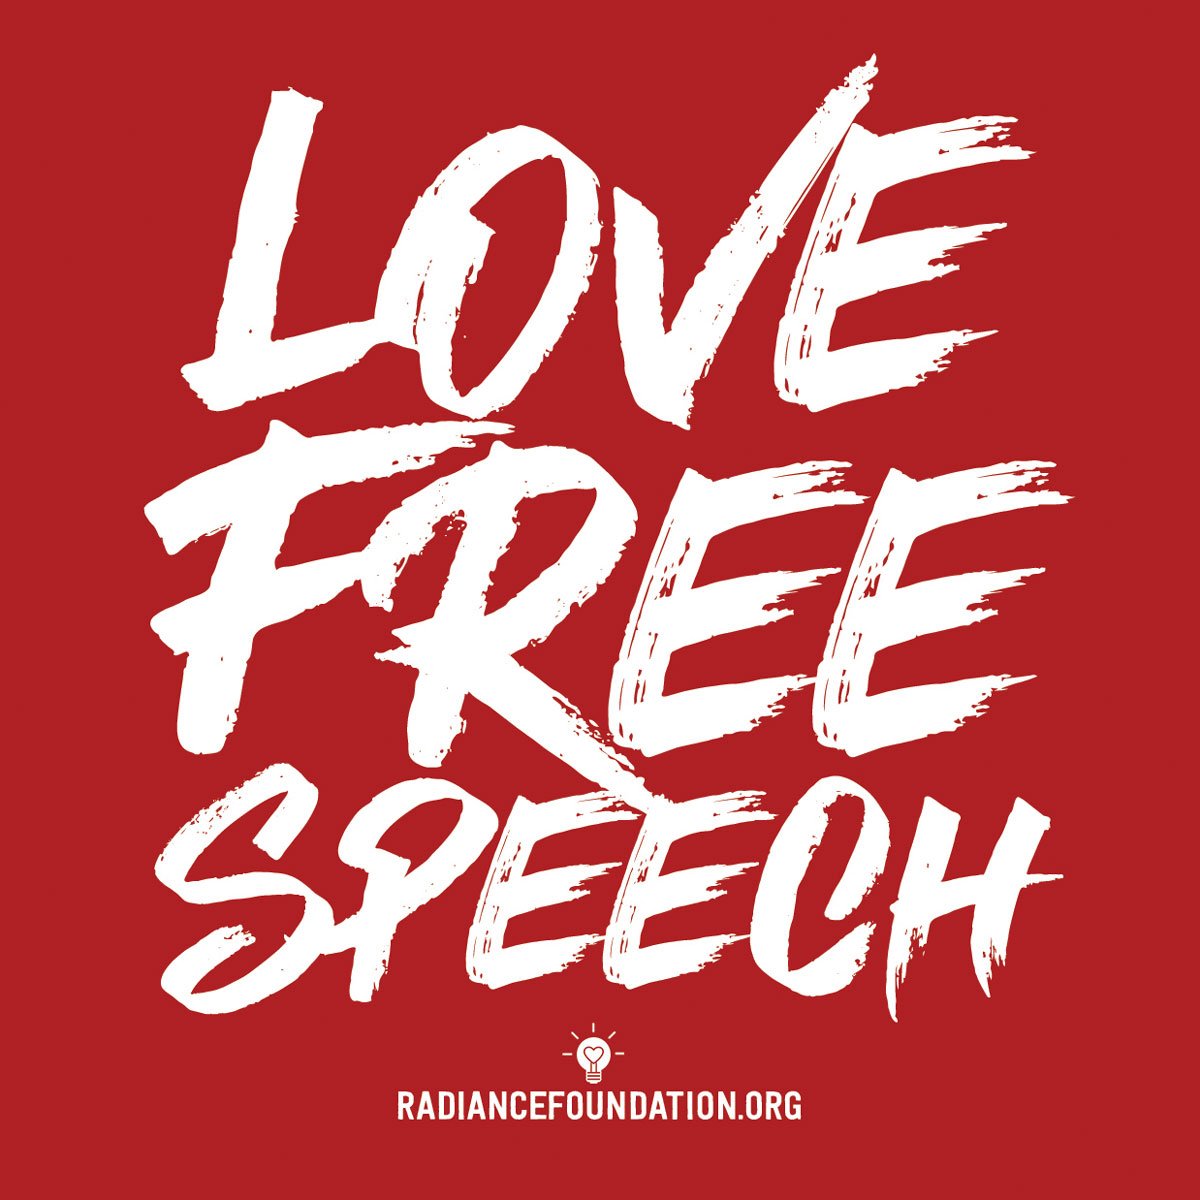 #SCOTUS: '...the FACT Act unduly burdens protected speech.' In narrow 5-4 win (all 4 dissenting justices are pro-abortion), @NIFLA prevails at Supreme Court over CA's effort to silence their #prolife #prowoman #propregnancy speech. #GiveFreeSpeechLife supremecourt.gov/opinions/17pdf…